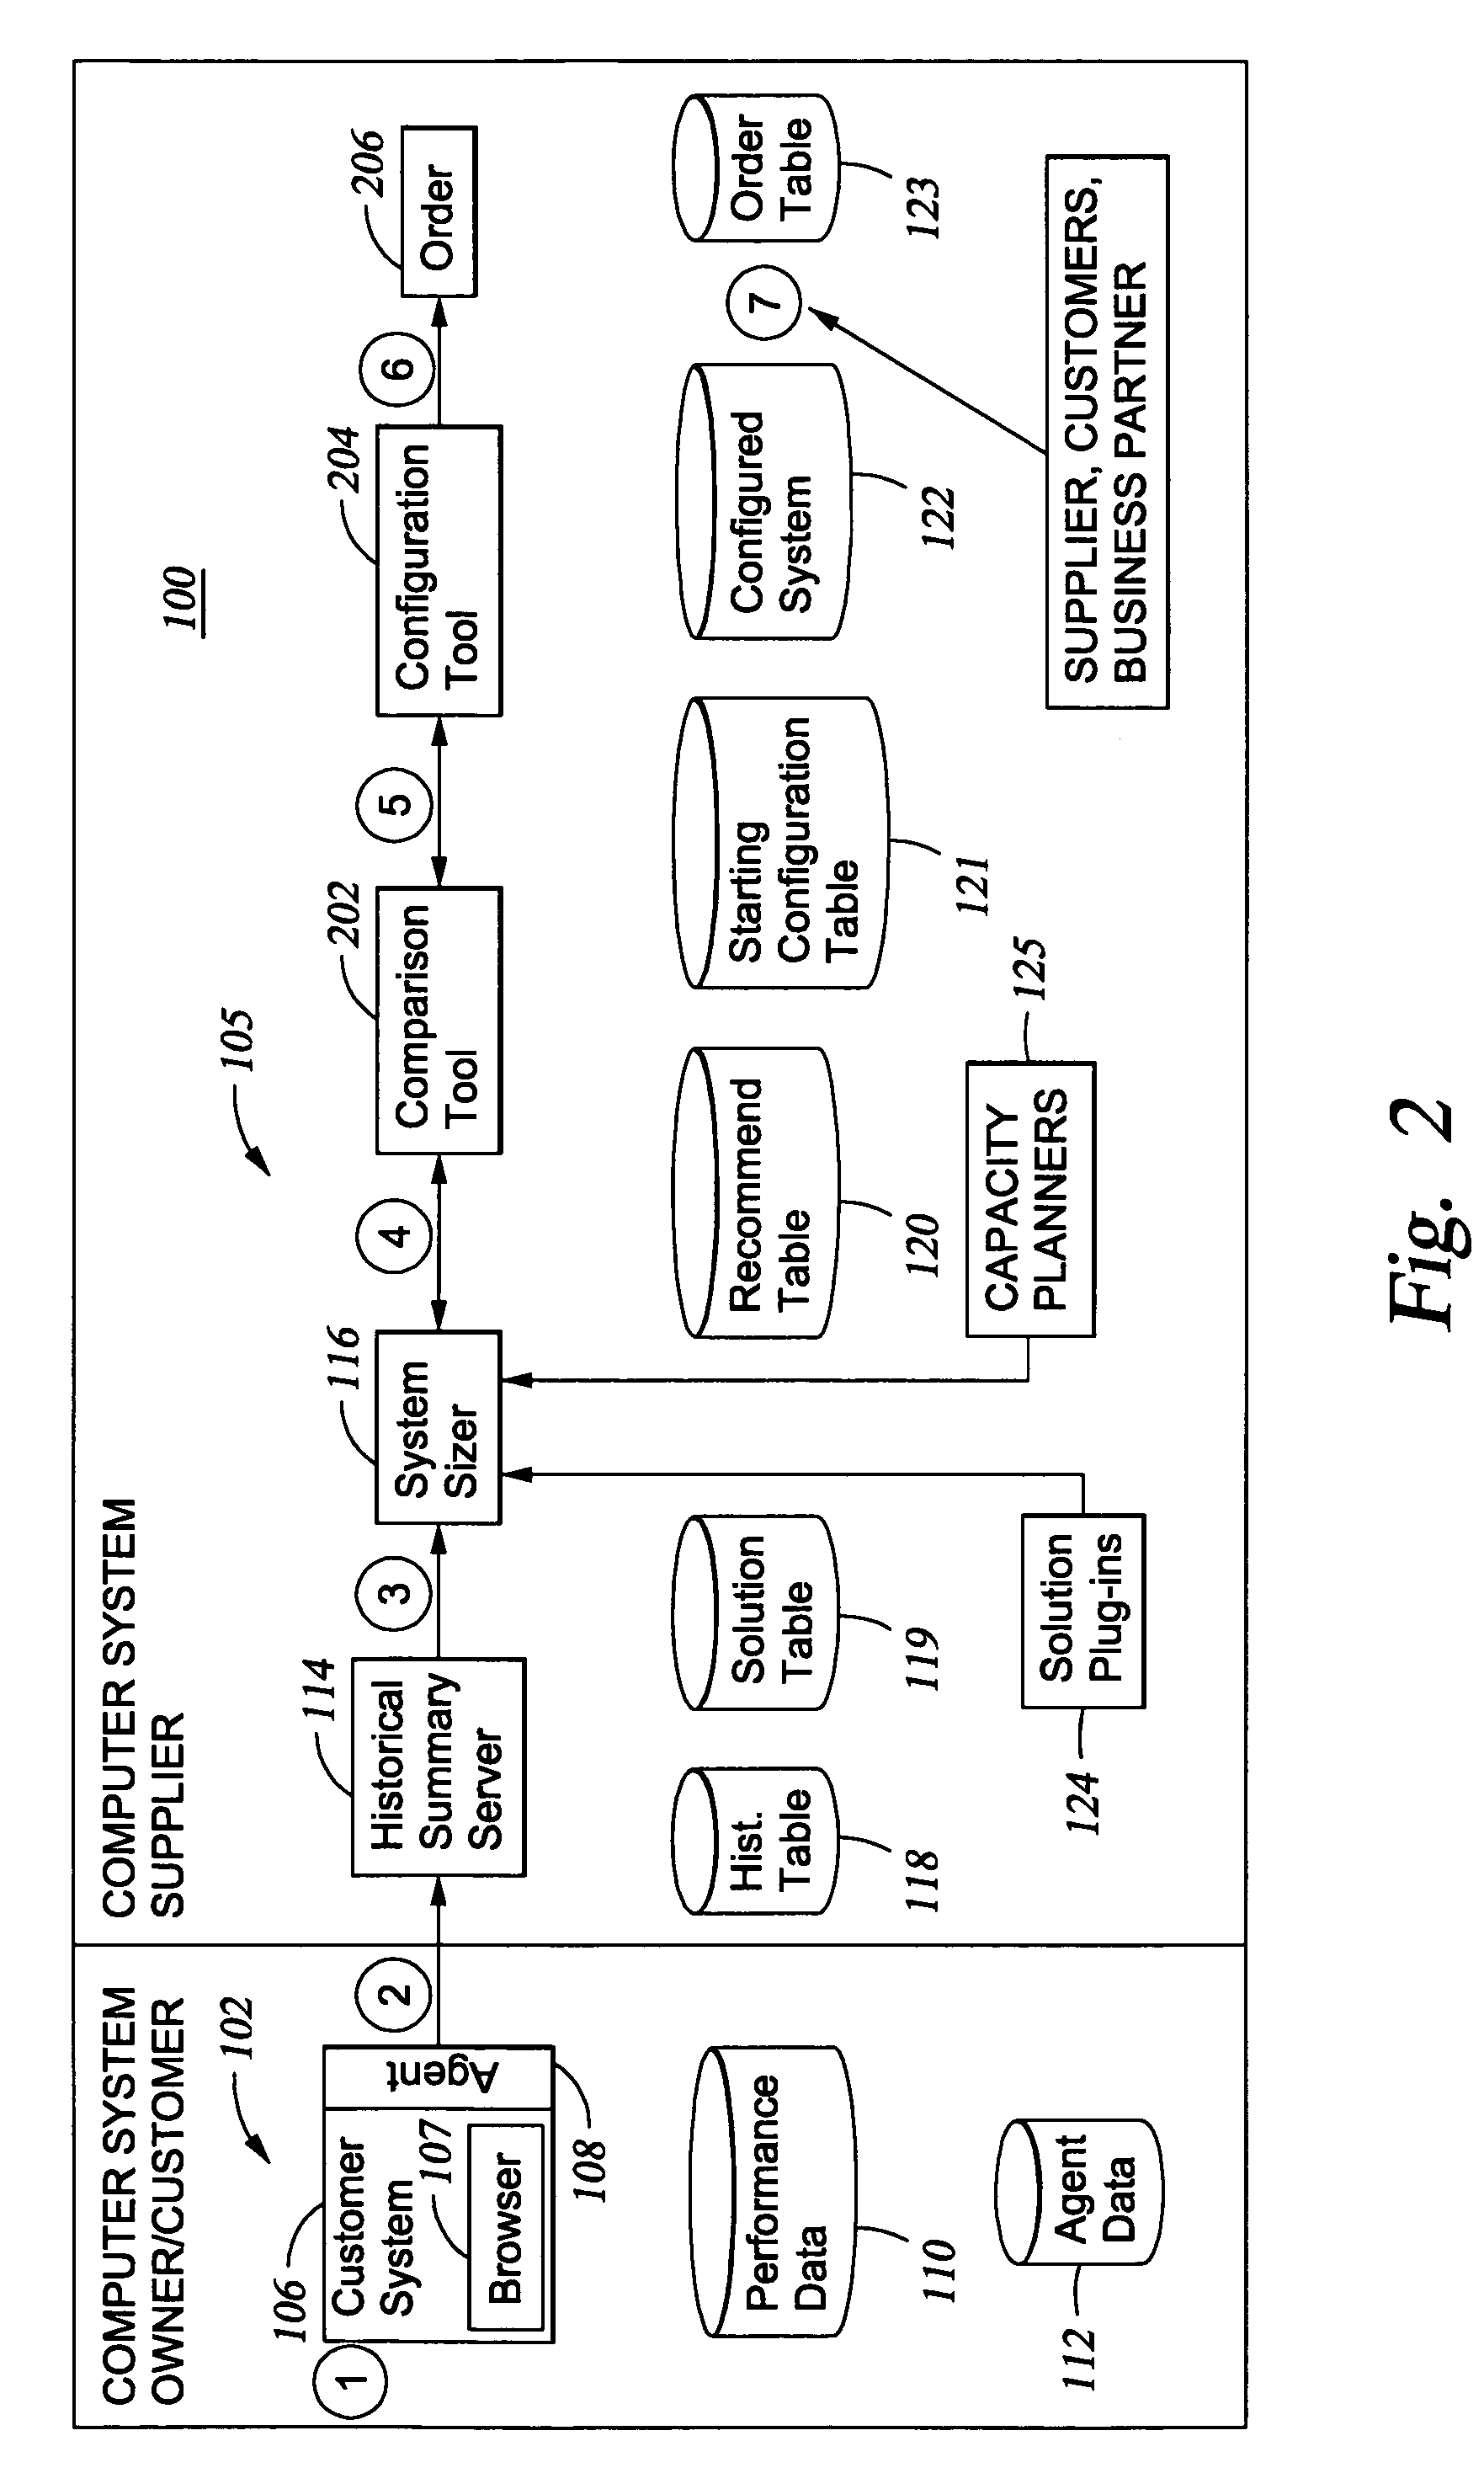 Method and apparatus upgrade assistance using critical historical product information